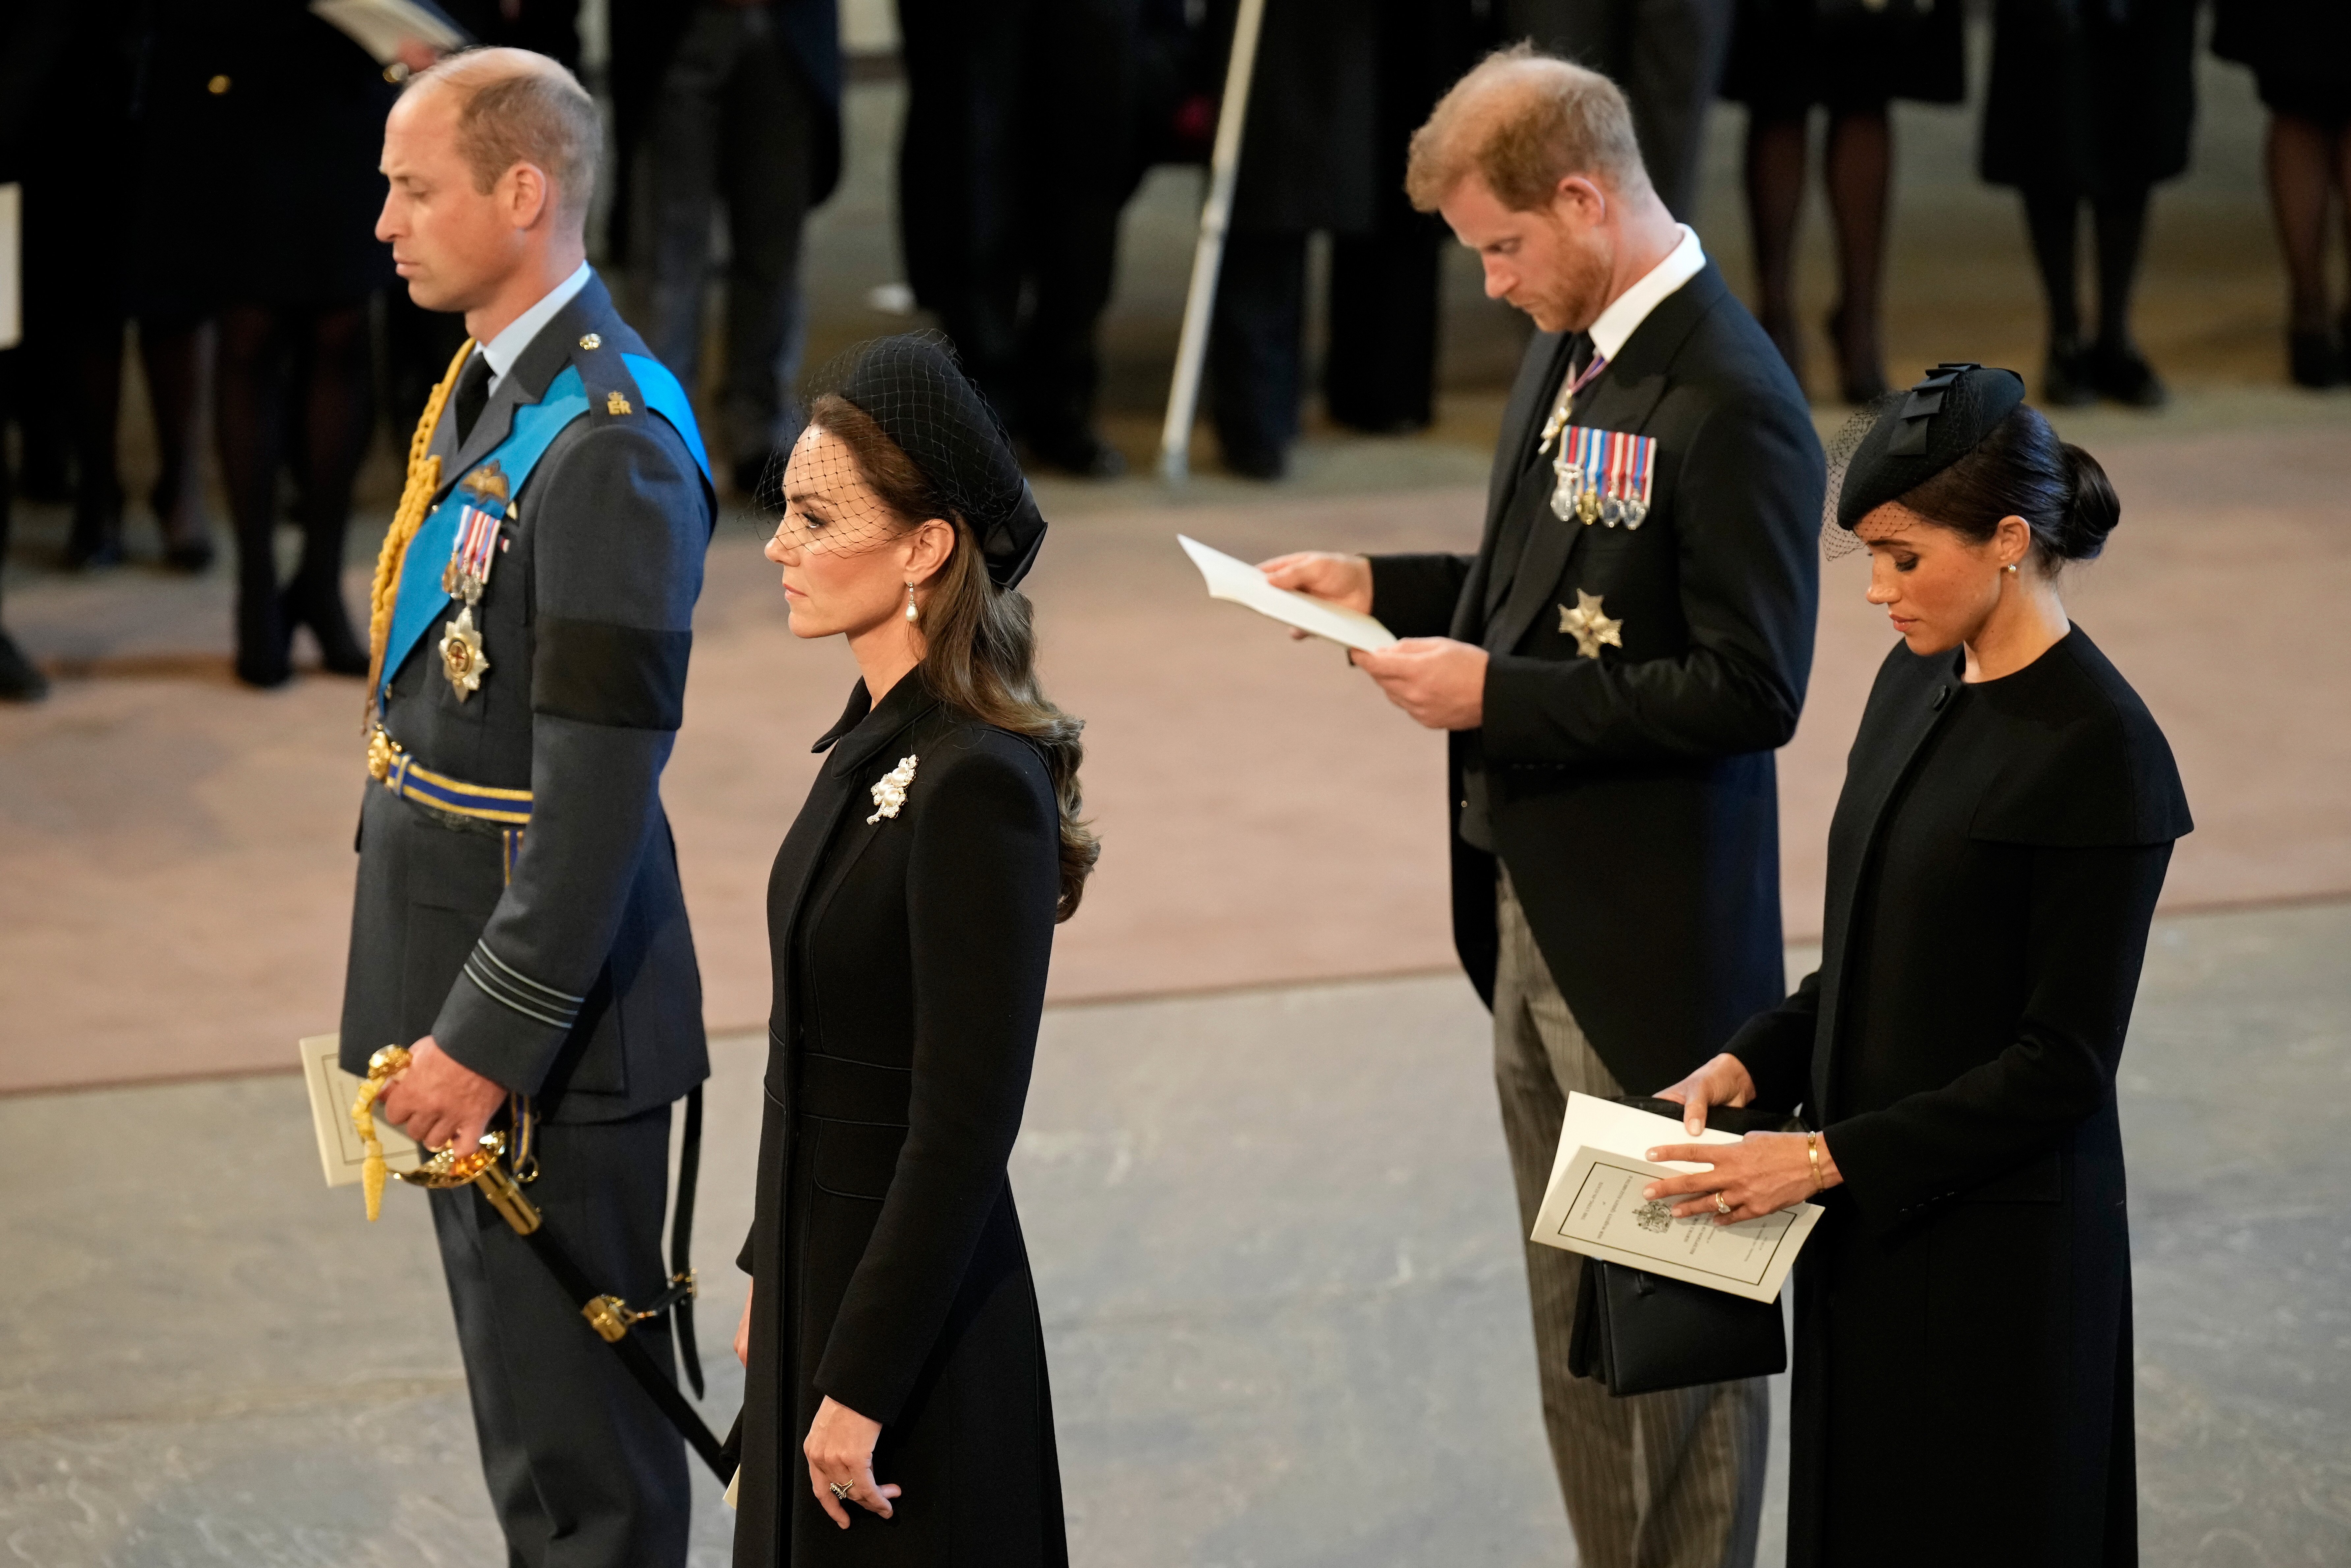 Prince William, Kate Middleton, Prince Harry, and Meghan, pay their respects inside the Palace of Westminster on September 14, 2022 in London, England | Source: Getty Images